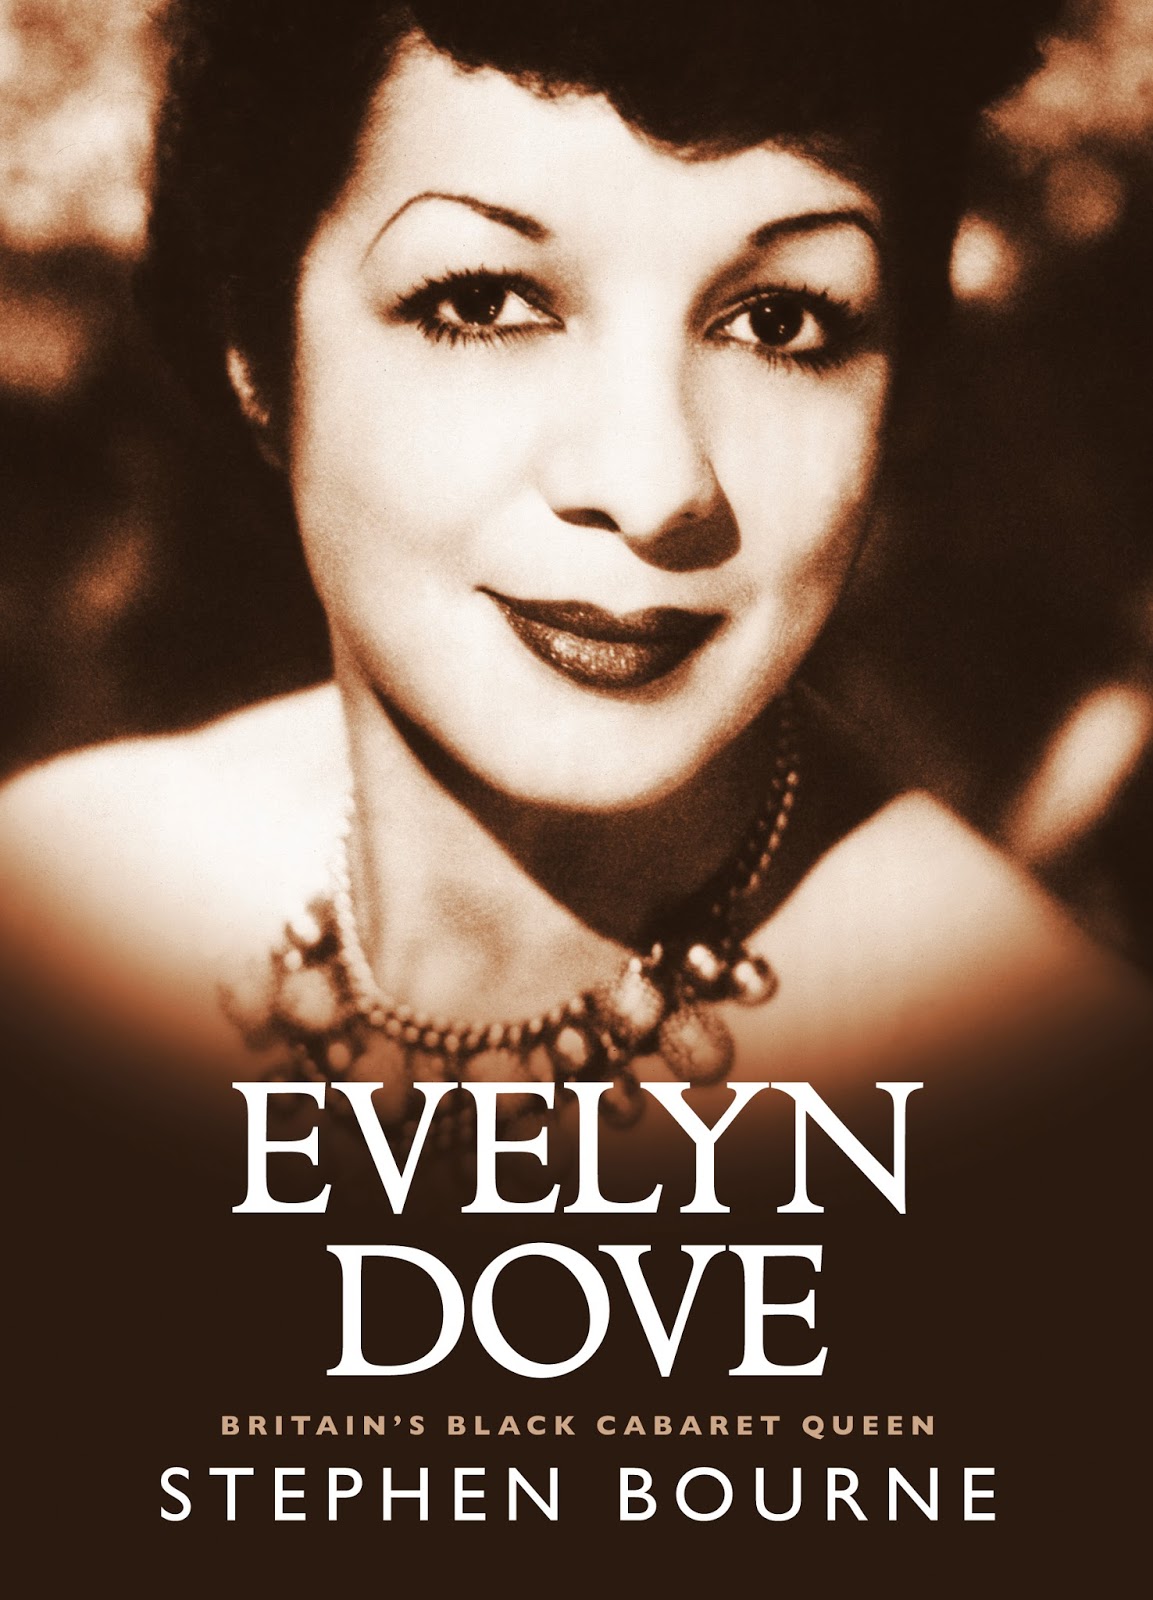 Evelyn Dove Biography British Singer Actress